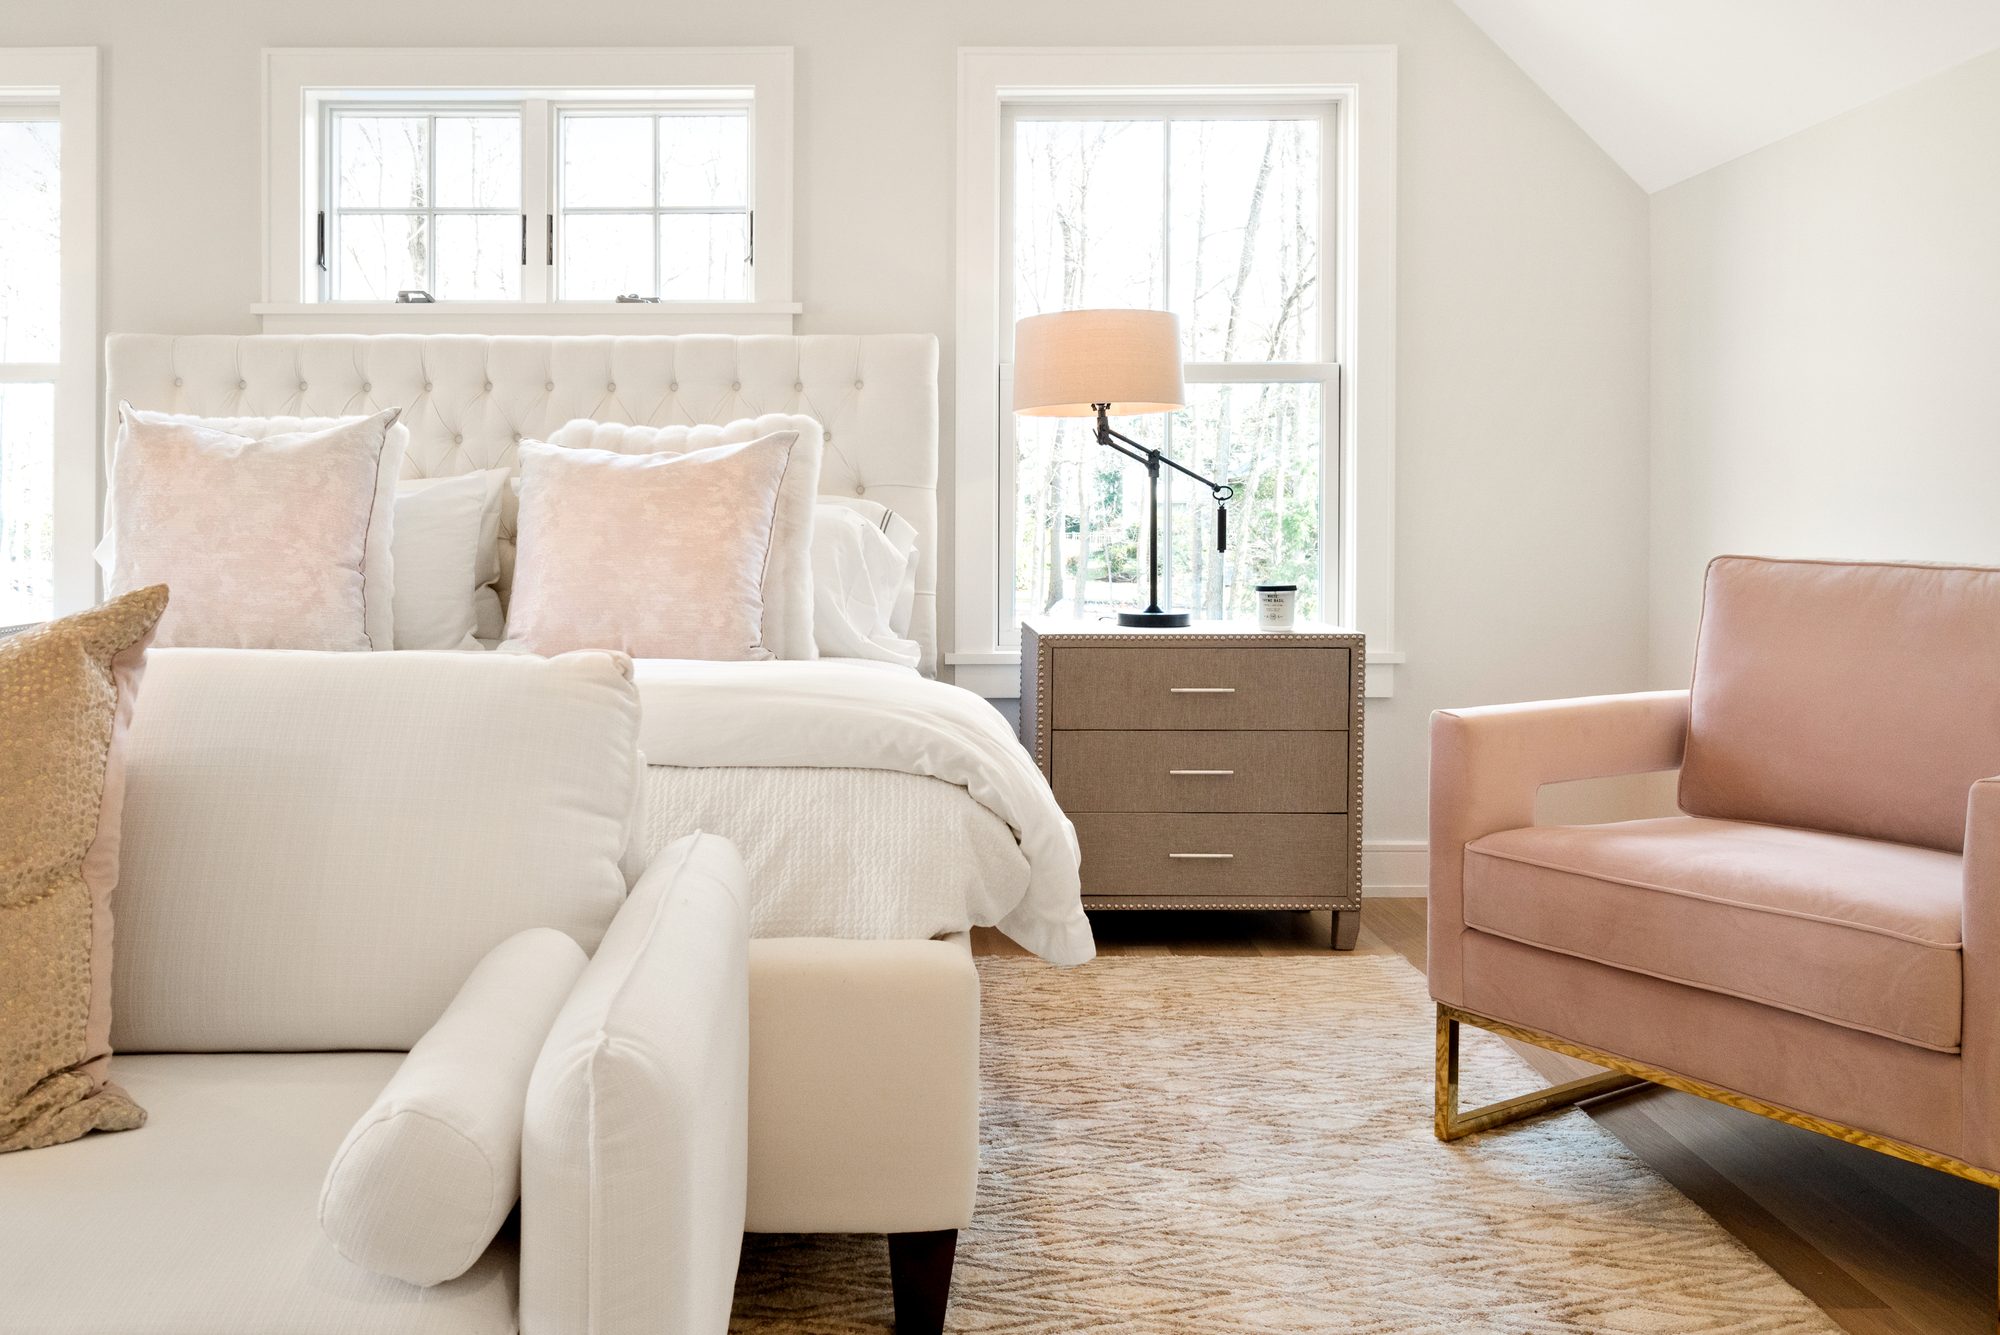 beautiful master bedroom design salmon pink decor with cream and tan